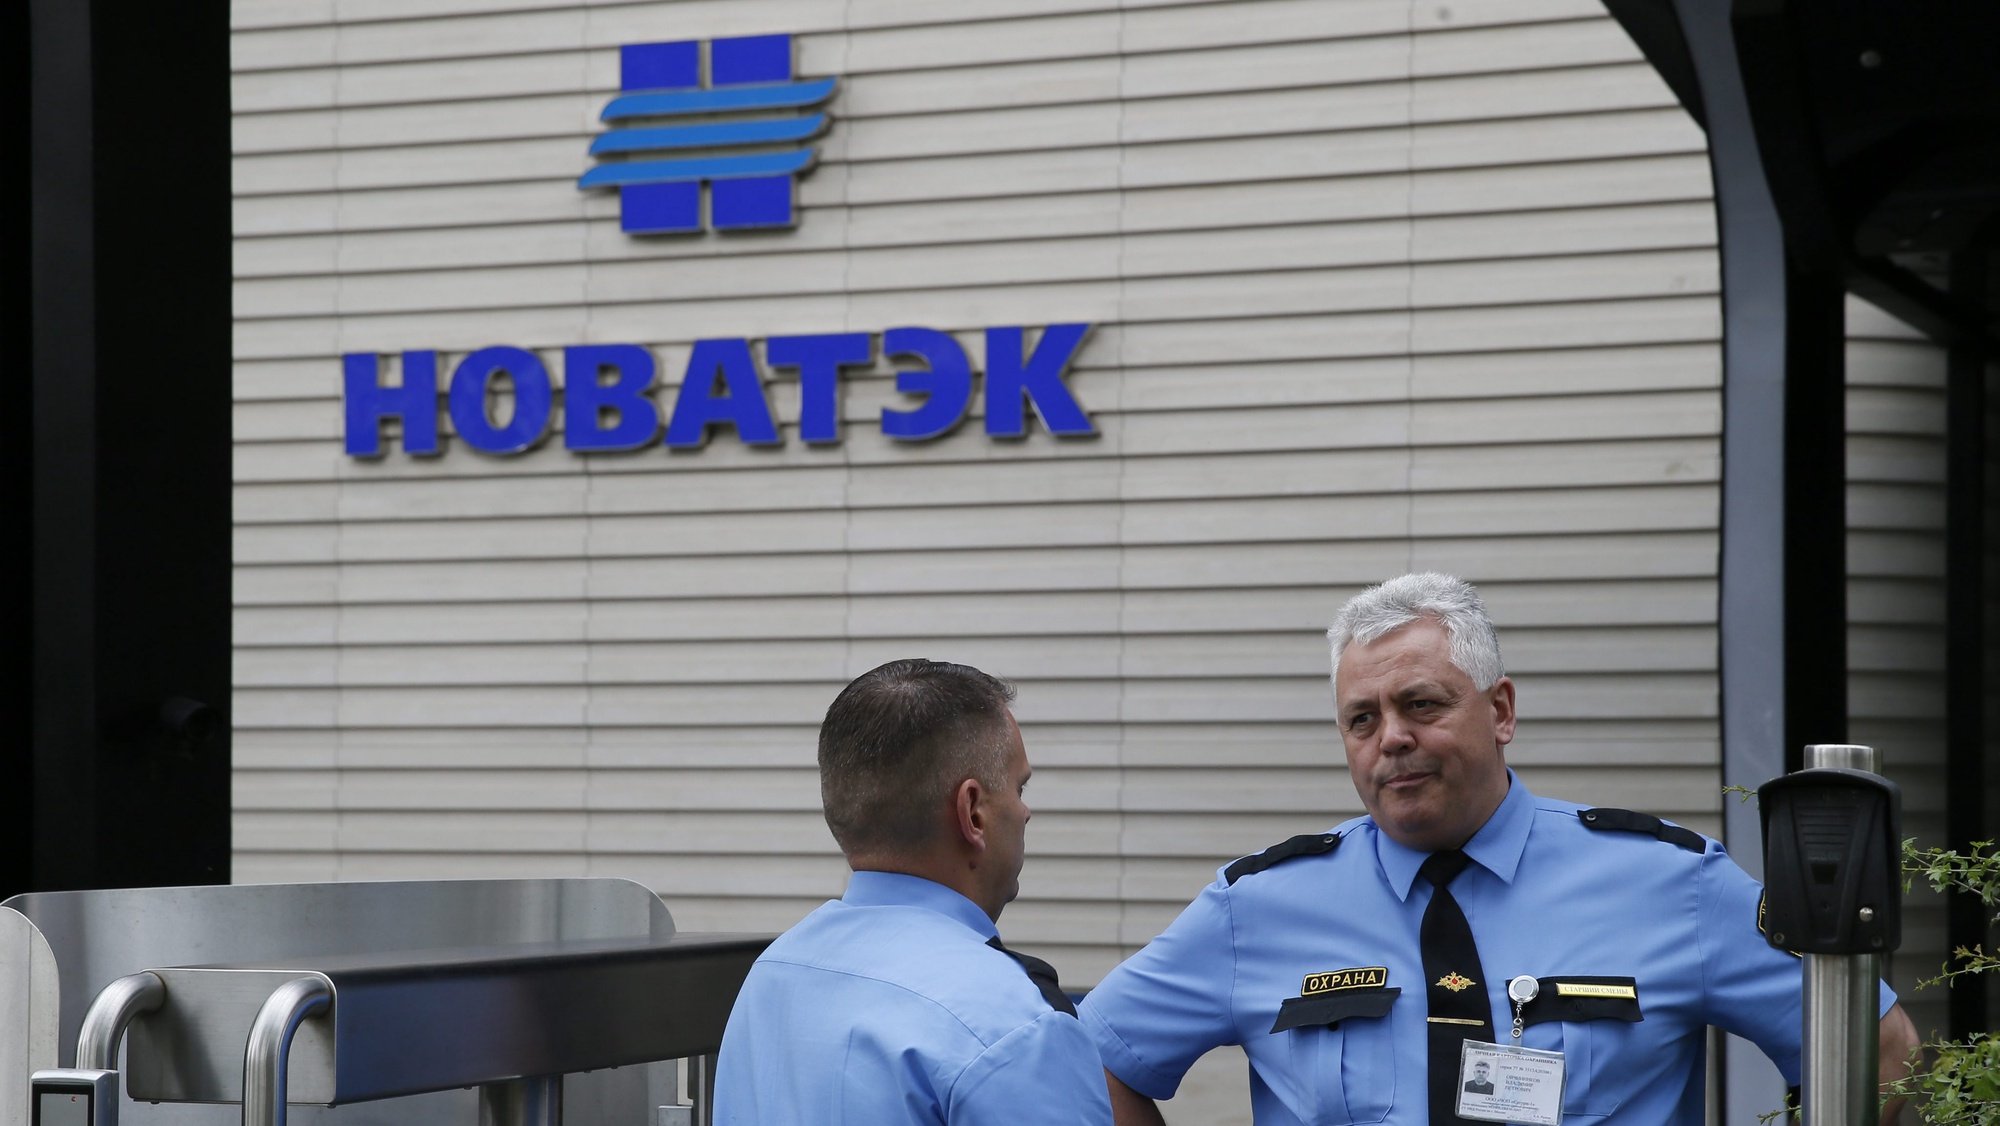 epa04319367 Security officers talk at the entrance to the Moscow office of Russia&#039;s major natural gas producer NOVATEK in Moscow, Russia, 17 July 2014. The United States has imposed a new package of Ukraine-related sanctions on Russian entities in defense, energy and banking sectors, including NOVATEK. Russia on 17 July reacted with outrage at the latest round of Western sanctions over the conflict in Ukraine while arguing that they would ultimately hurt the West more than itself. The Foreign Ministry in Moscow said the US measures are &#039;a primitive attempt at revenge because events in Ukraine are not developing according to its scenario,&#039; the Foreign Ministry in Moscow said, adding that it reserves the right to retaliate.  EPA/YURI KOCHETKOV